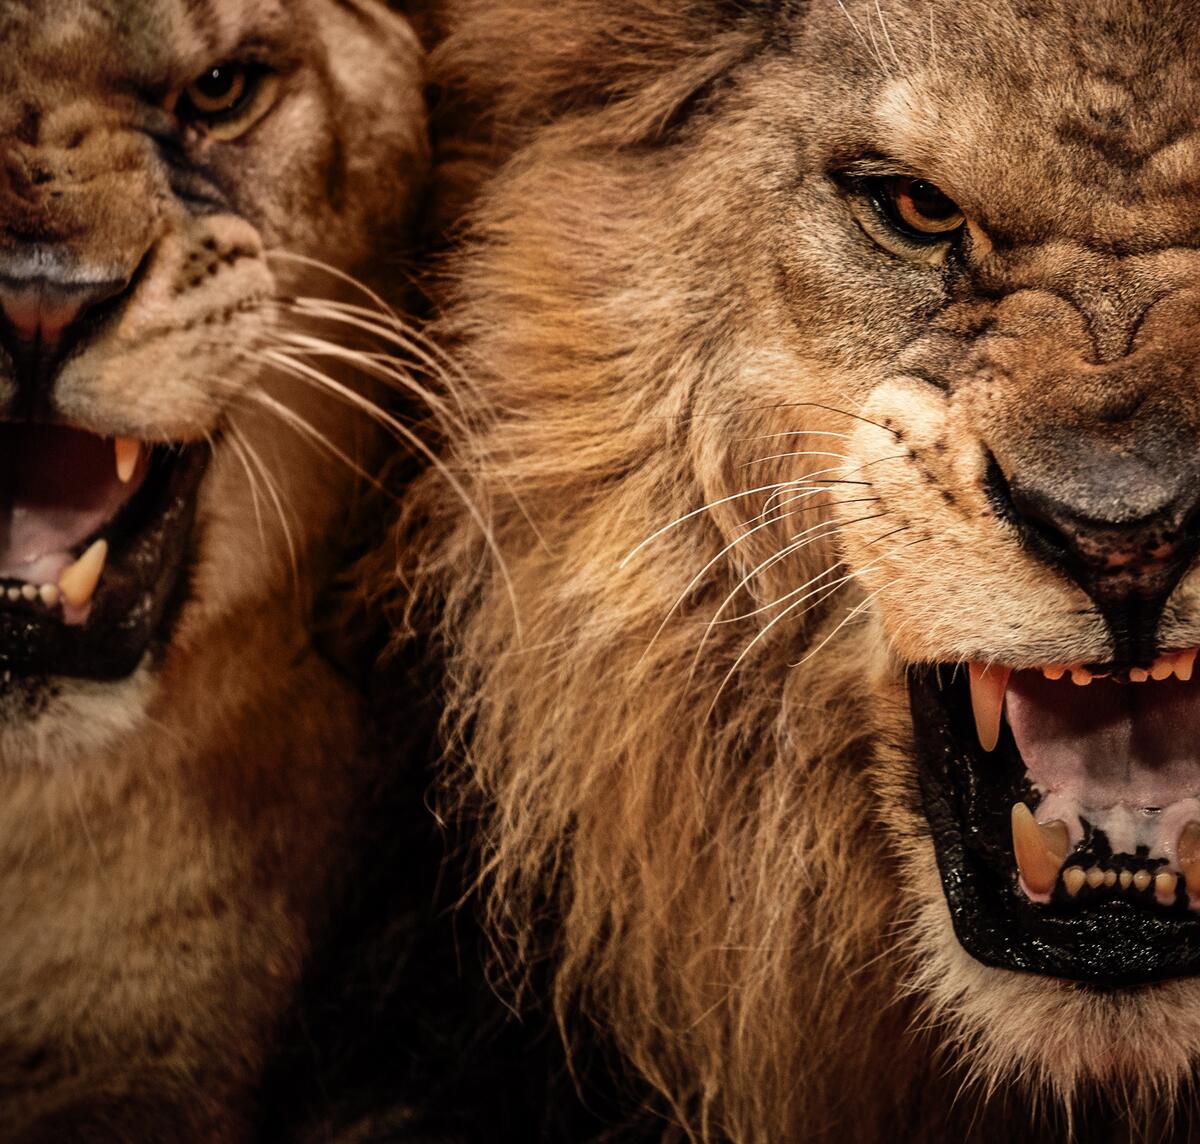 The lion and the lioness growl at the spectator